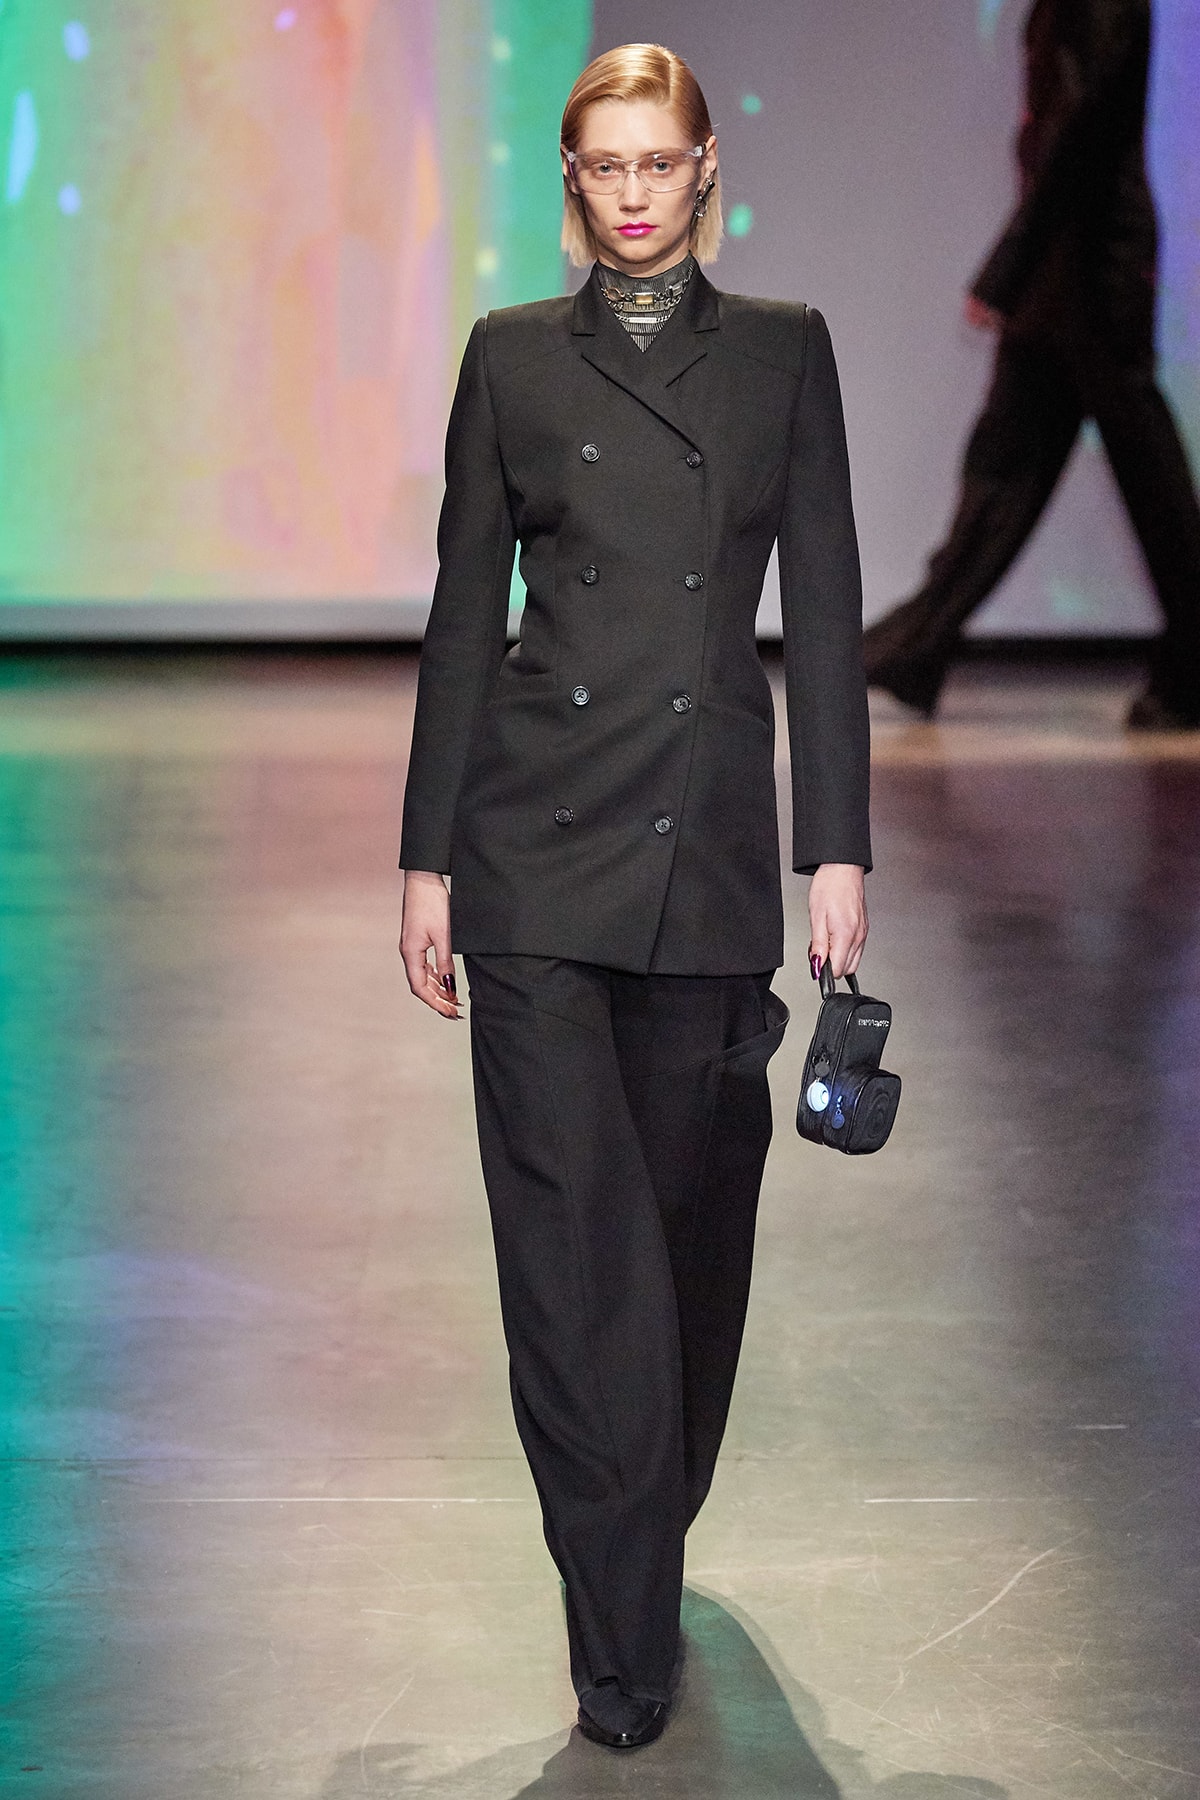 Marine Serre Fall/Winter 2020 Collection Runway Show Suit Black